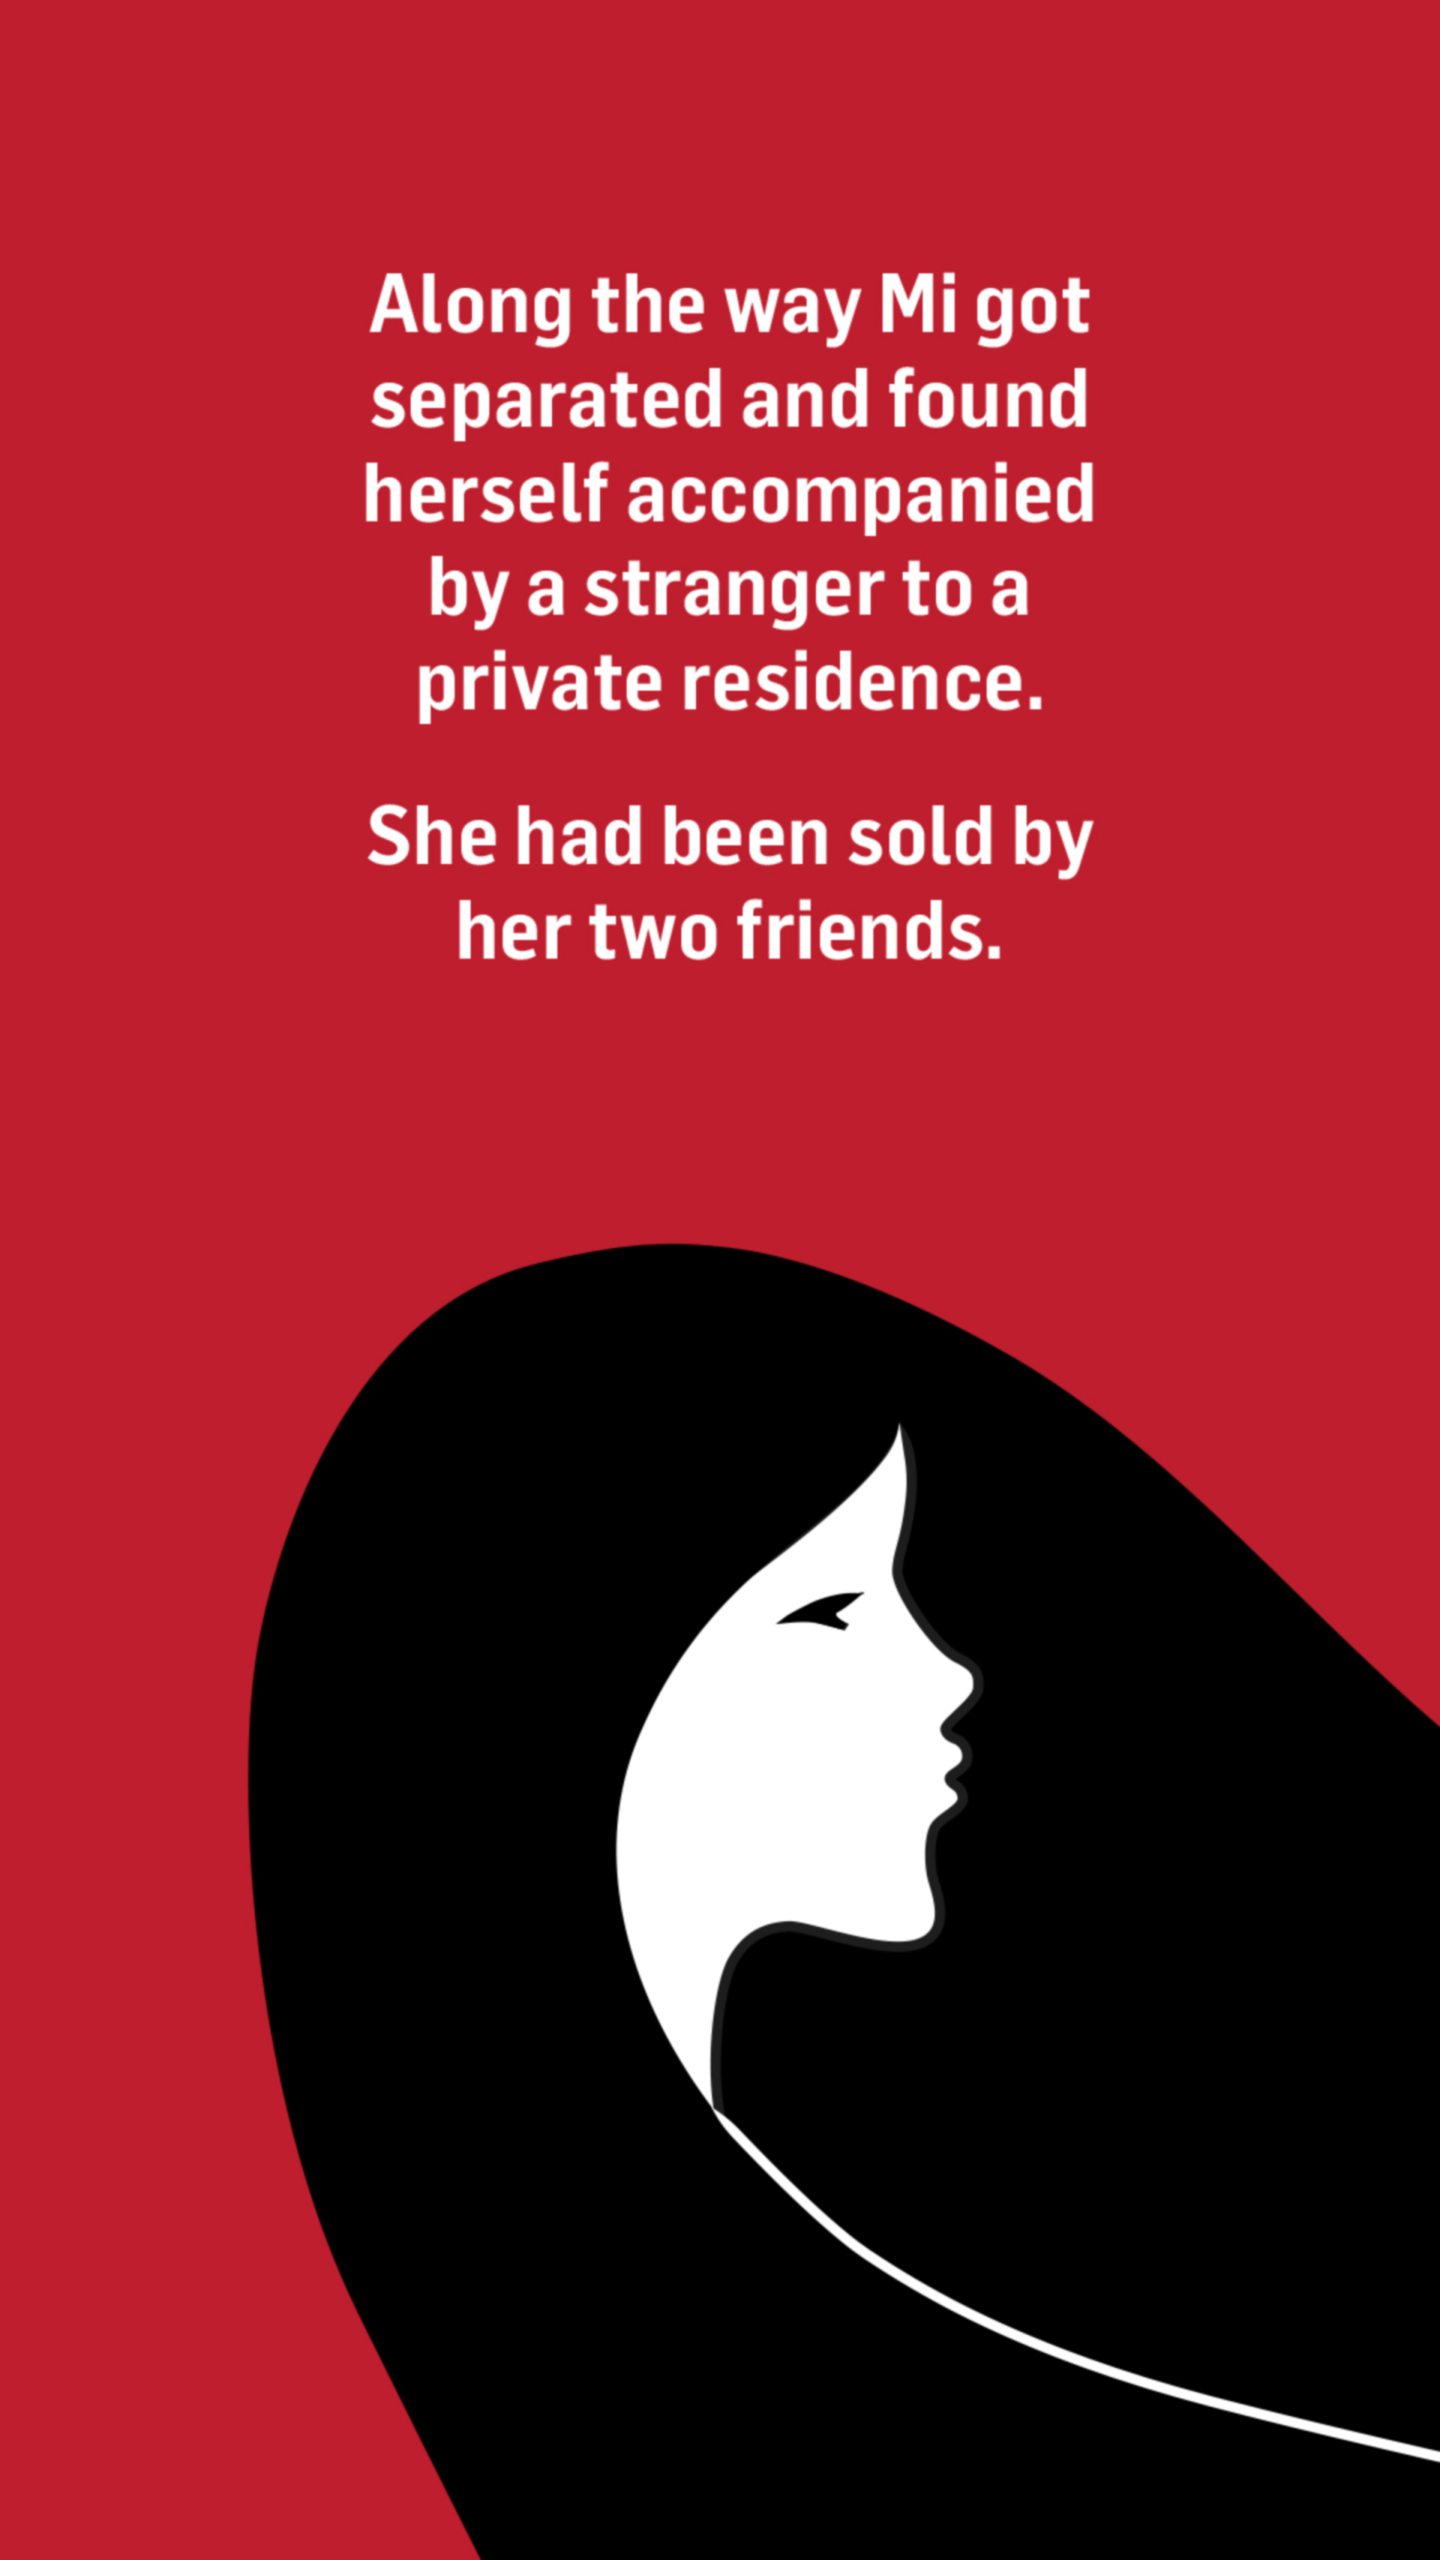 An illustration of one girl's head. With the words: Along the way Mi got separated and found herself accompanied by a stranger to a private residence.

She had been sold by her two friends.